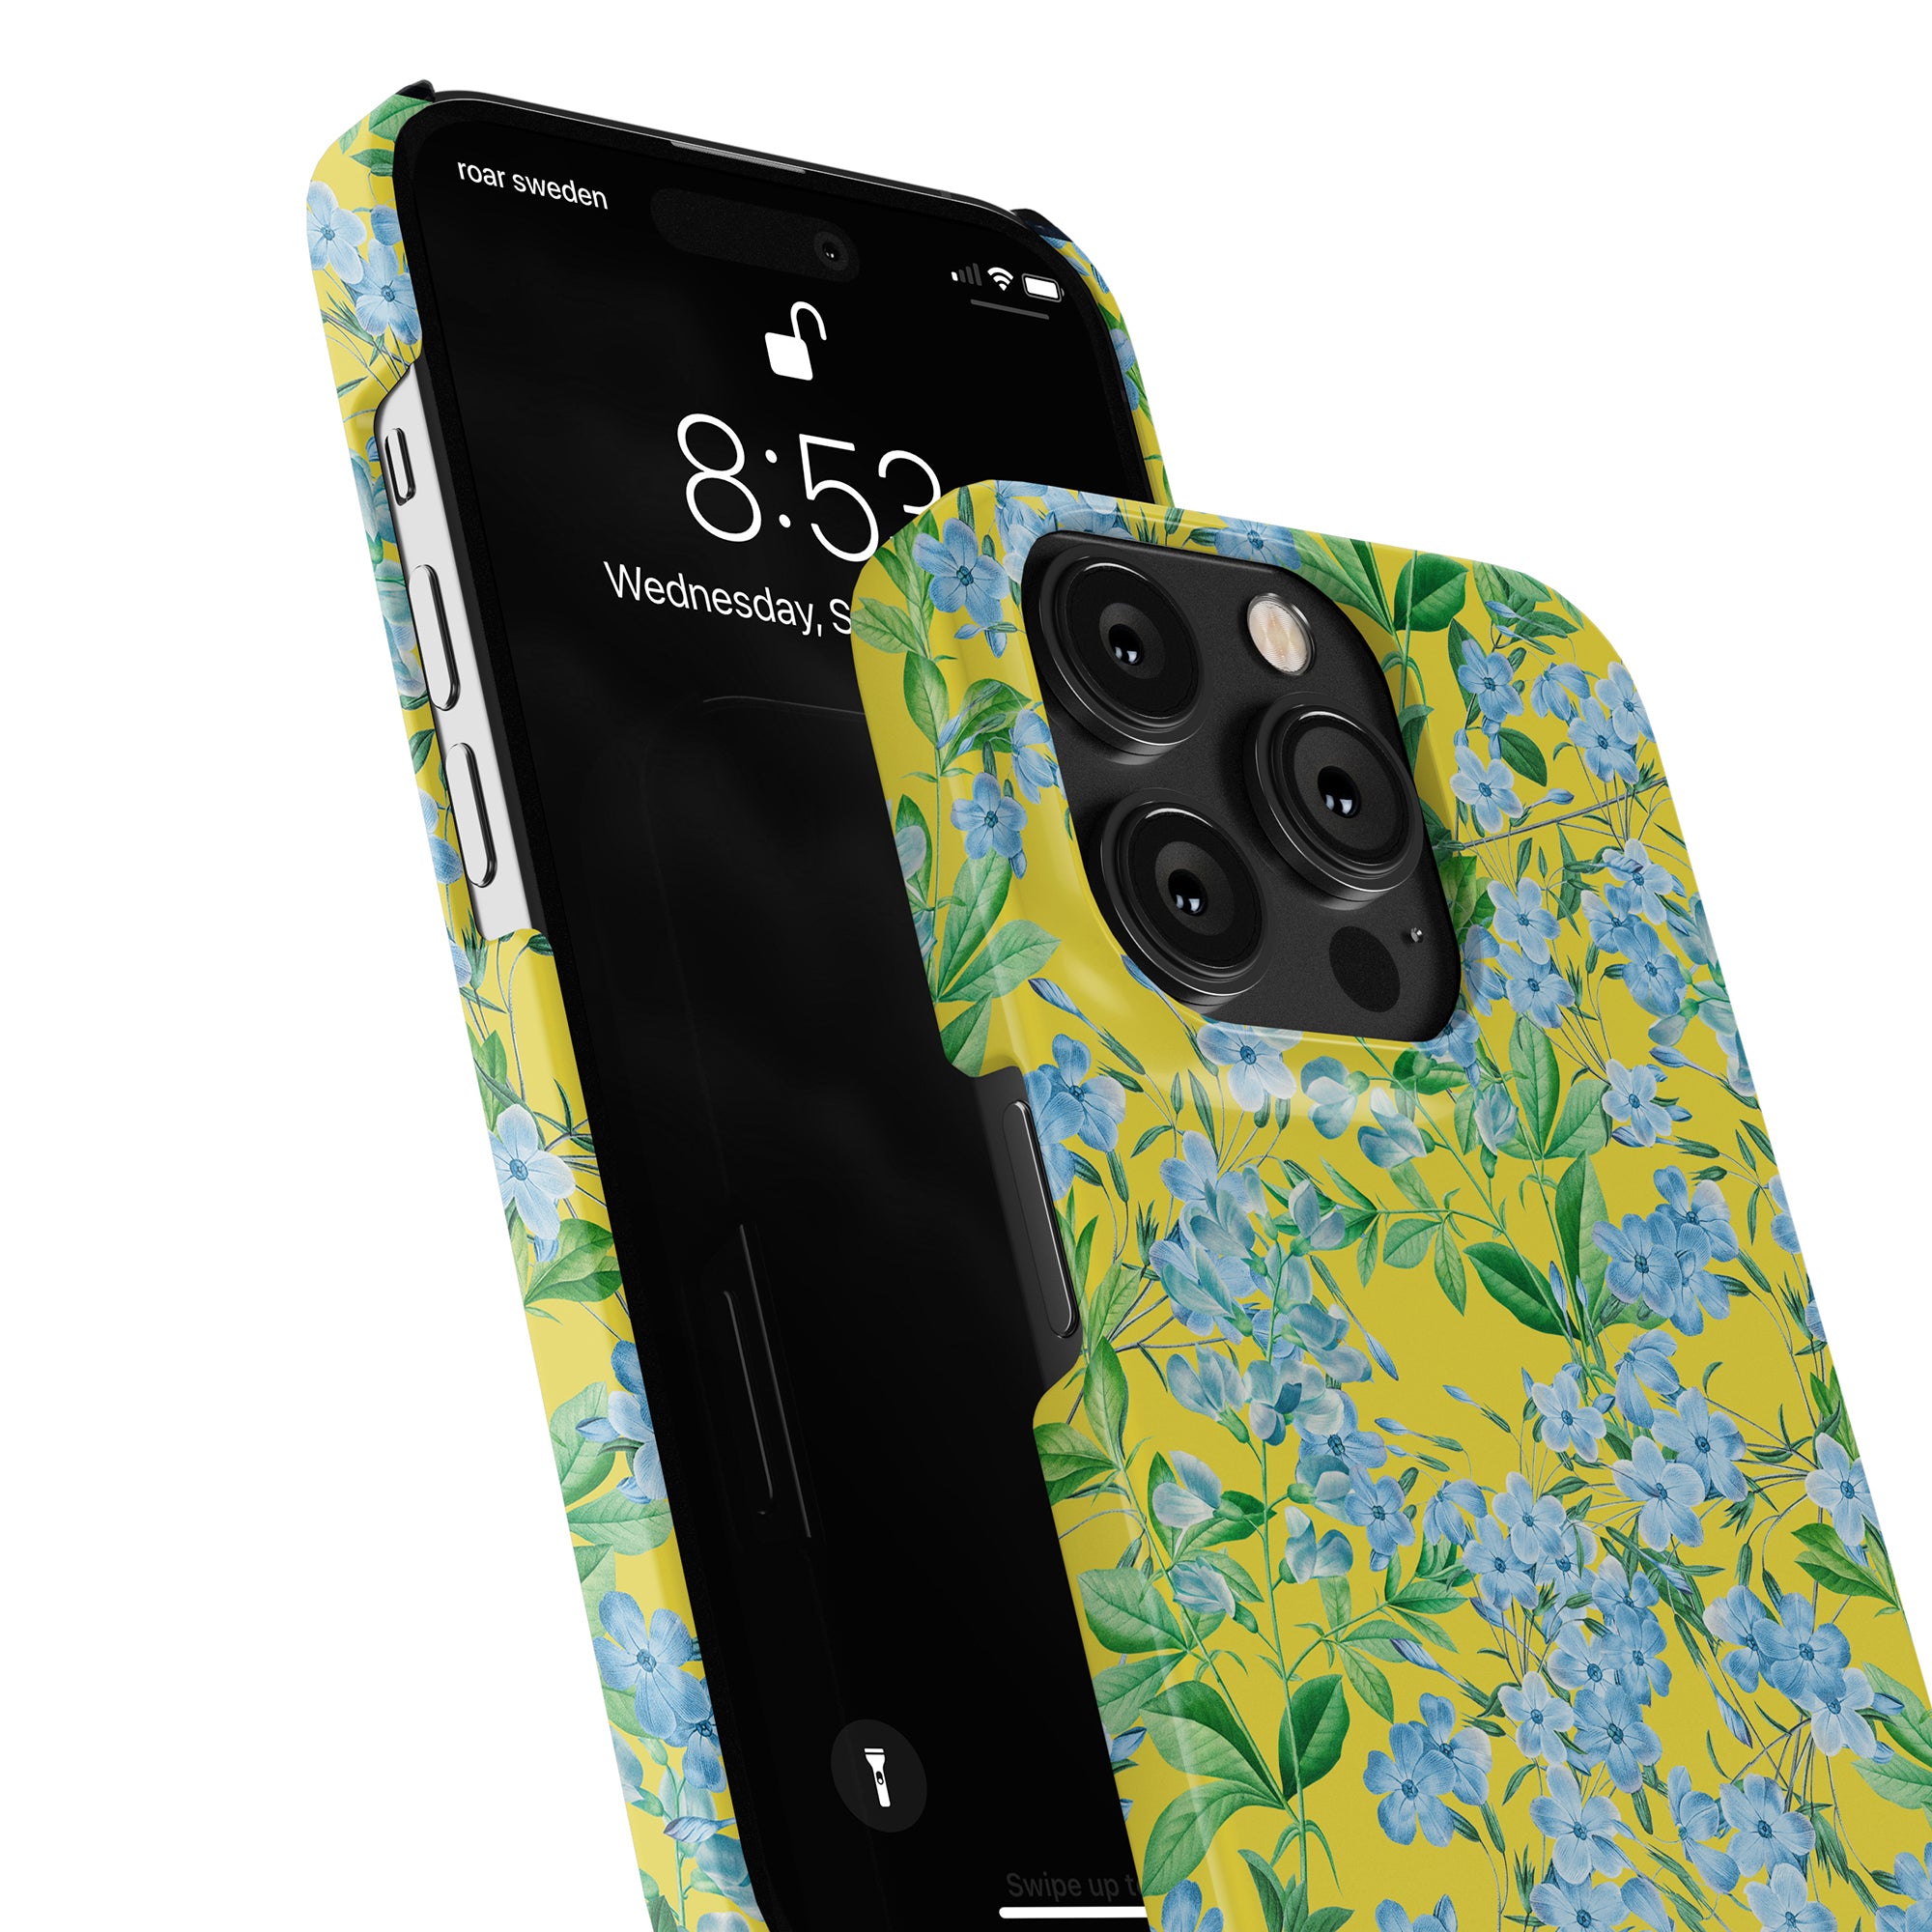 A smartphone with a Spring Ditsy - Slim case seen from a perspective that showcases both the front screen and rear camera design, perfect for your product description needs in SEO.